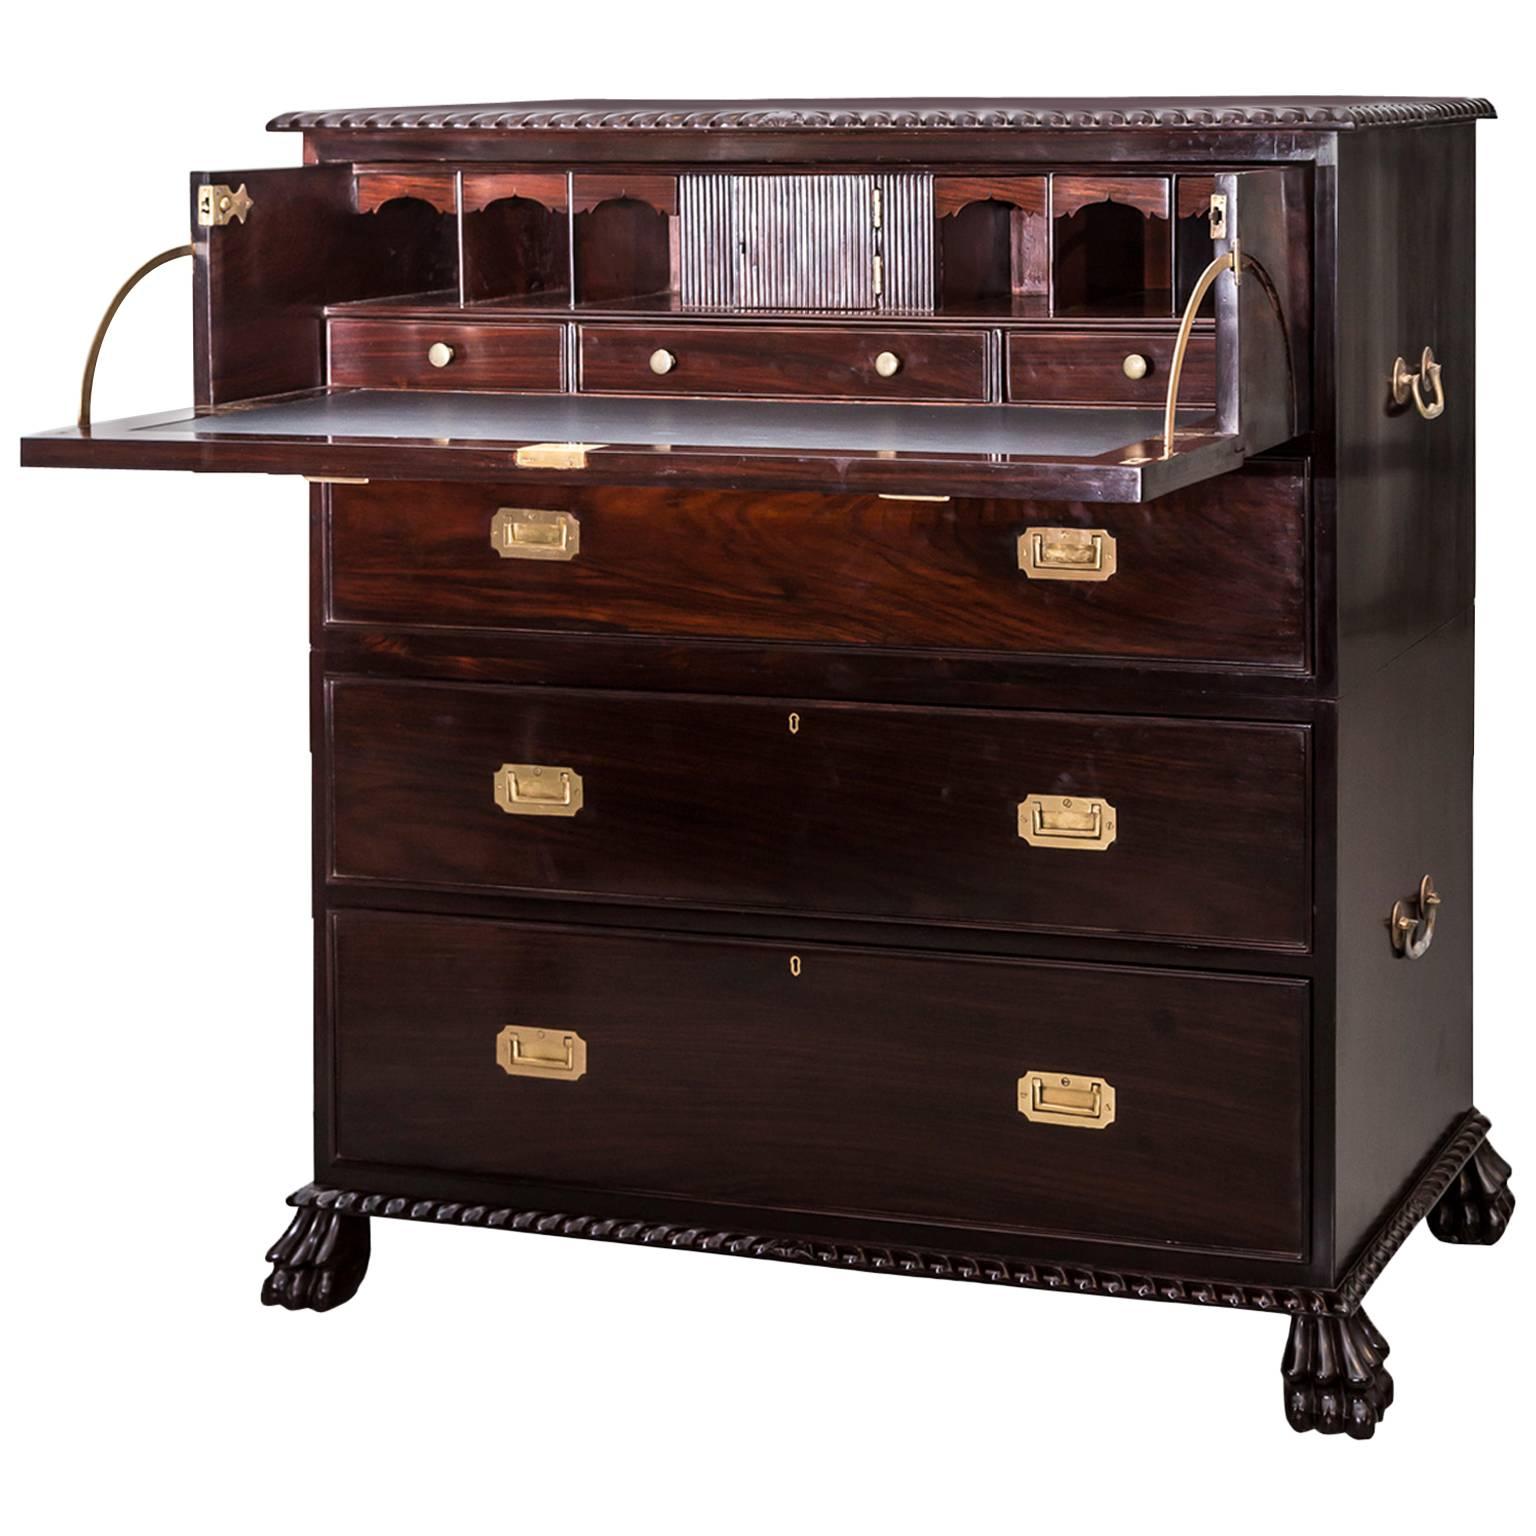 Anglo-Indian or British Colonial Rosewood Campaign Secretaire Chest of Drawers For Sale